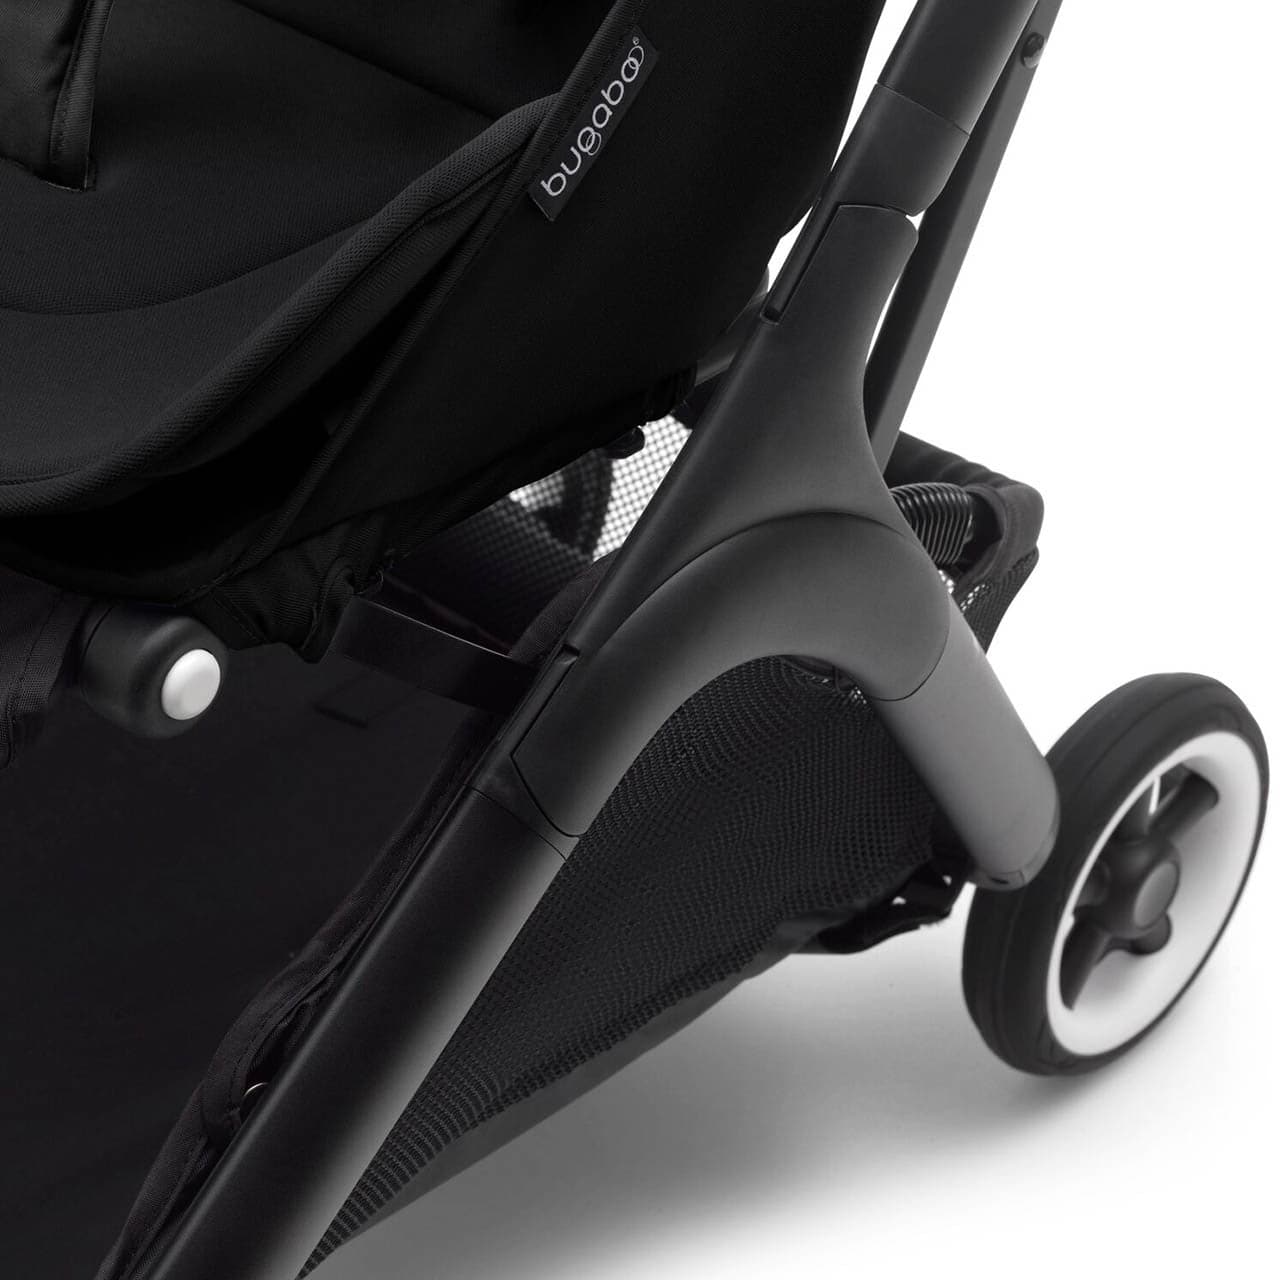 Bugaboo Butterfly Stroller - Midnight Black - For Your Little One